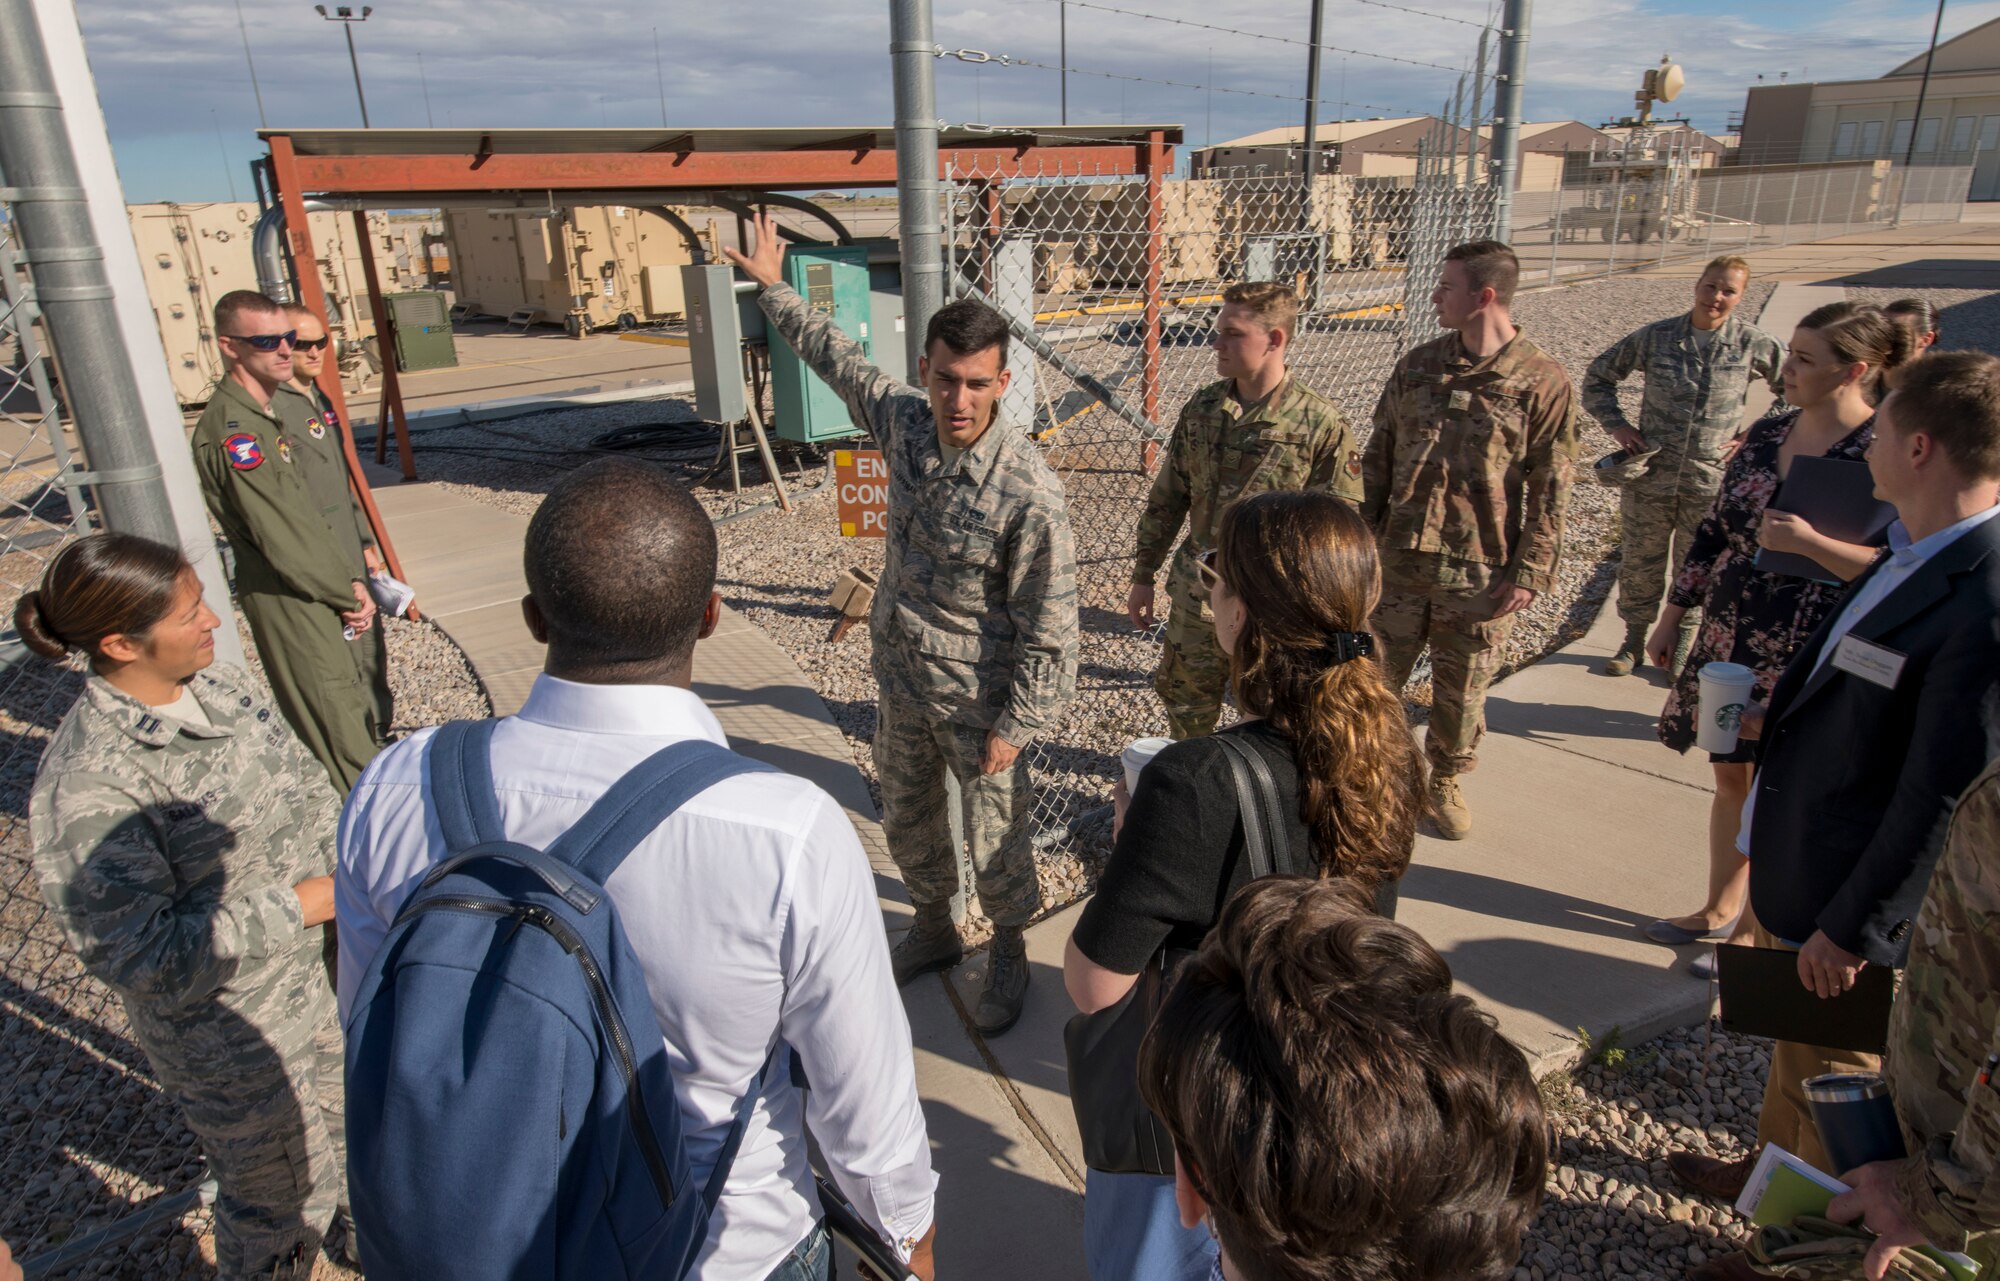 1st Lt. Alex Gharakanian, 49th Aircraft Maintenance Squadron aircraft communications maintenance unit officer-in-charge, introduces the MQ-9  Cockpit Farm to Congressional staffers, Oct. 2, 2019, on Holloman Air Force Base, N.M. The staffers represent Congresswoman Deb Haaland, Congresswoman Xochitl Torres Small, Congresswoman Veronica Escobar and Senator Martin Heinrich. (U.S. Air Force photo by Staff Sgt. Christine Groening)